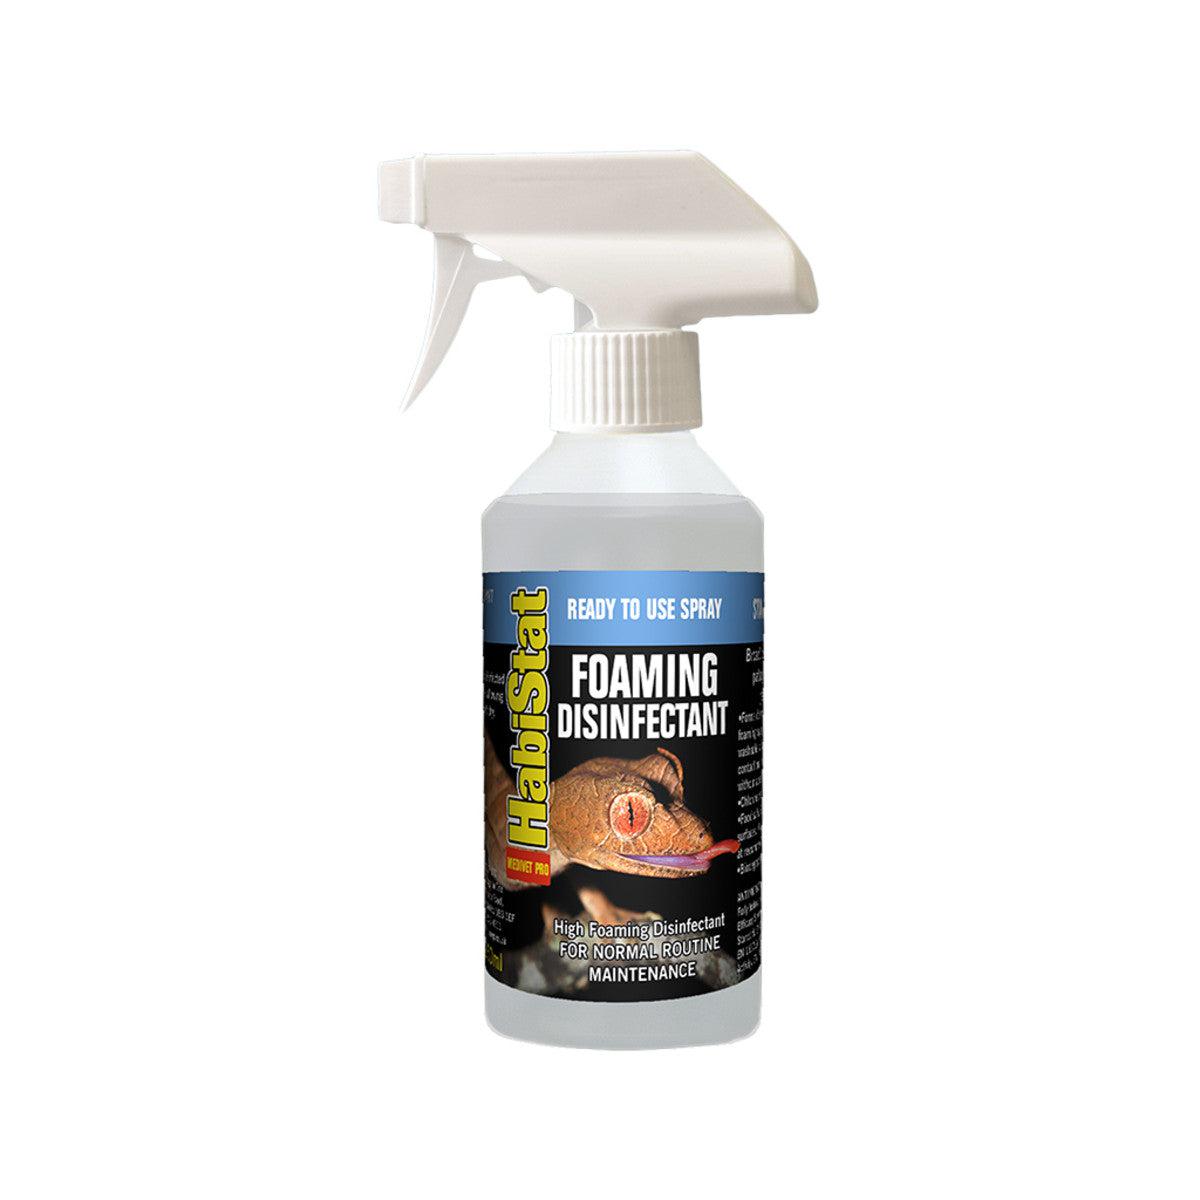 HabiStat Disinfectant Foam Cleaner, Ready to Use Spray